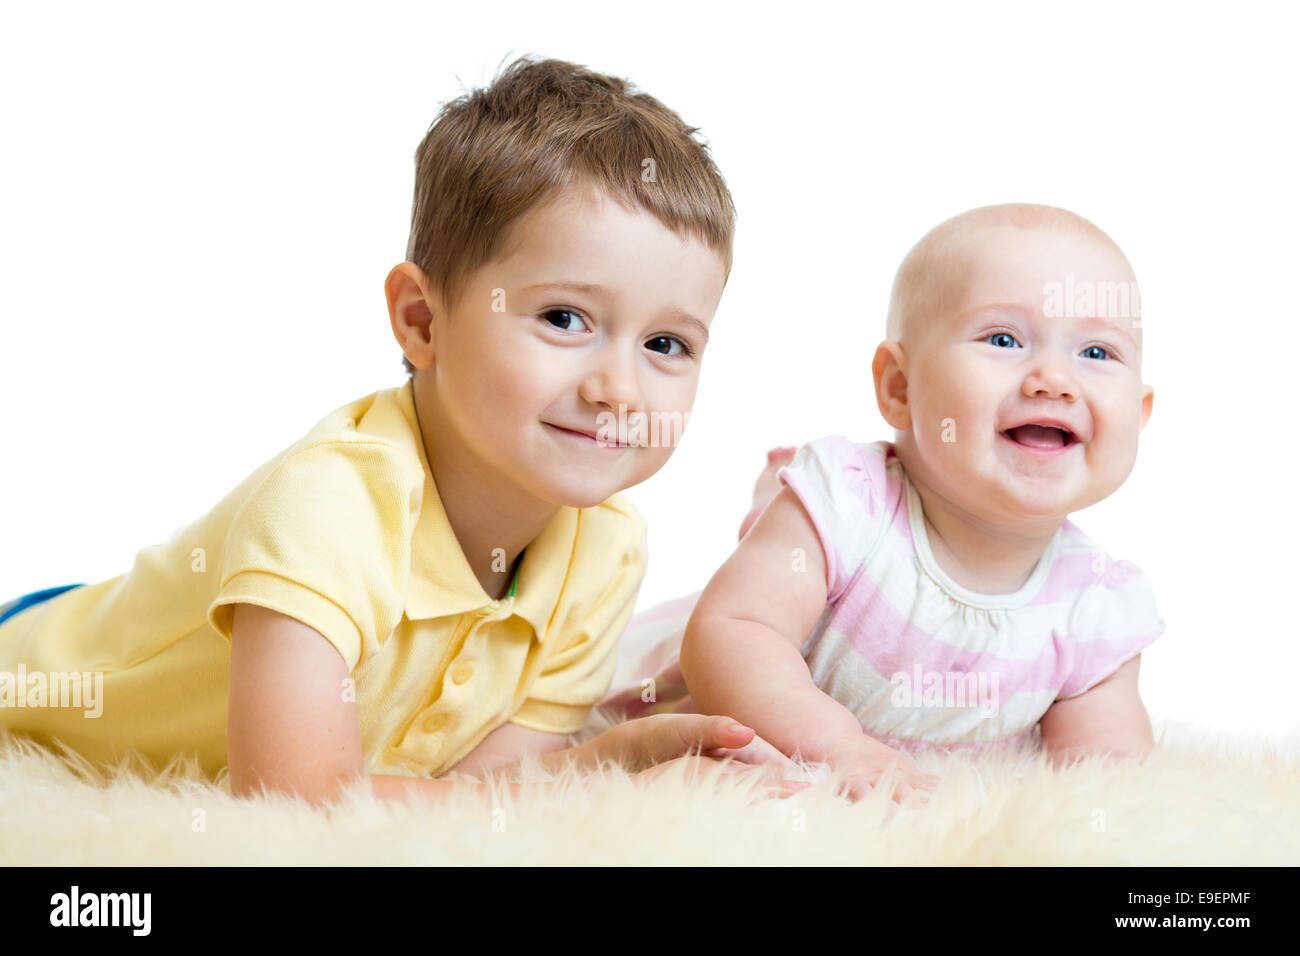 Cute kids brother and sister lying on floor Stock Photo